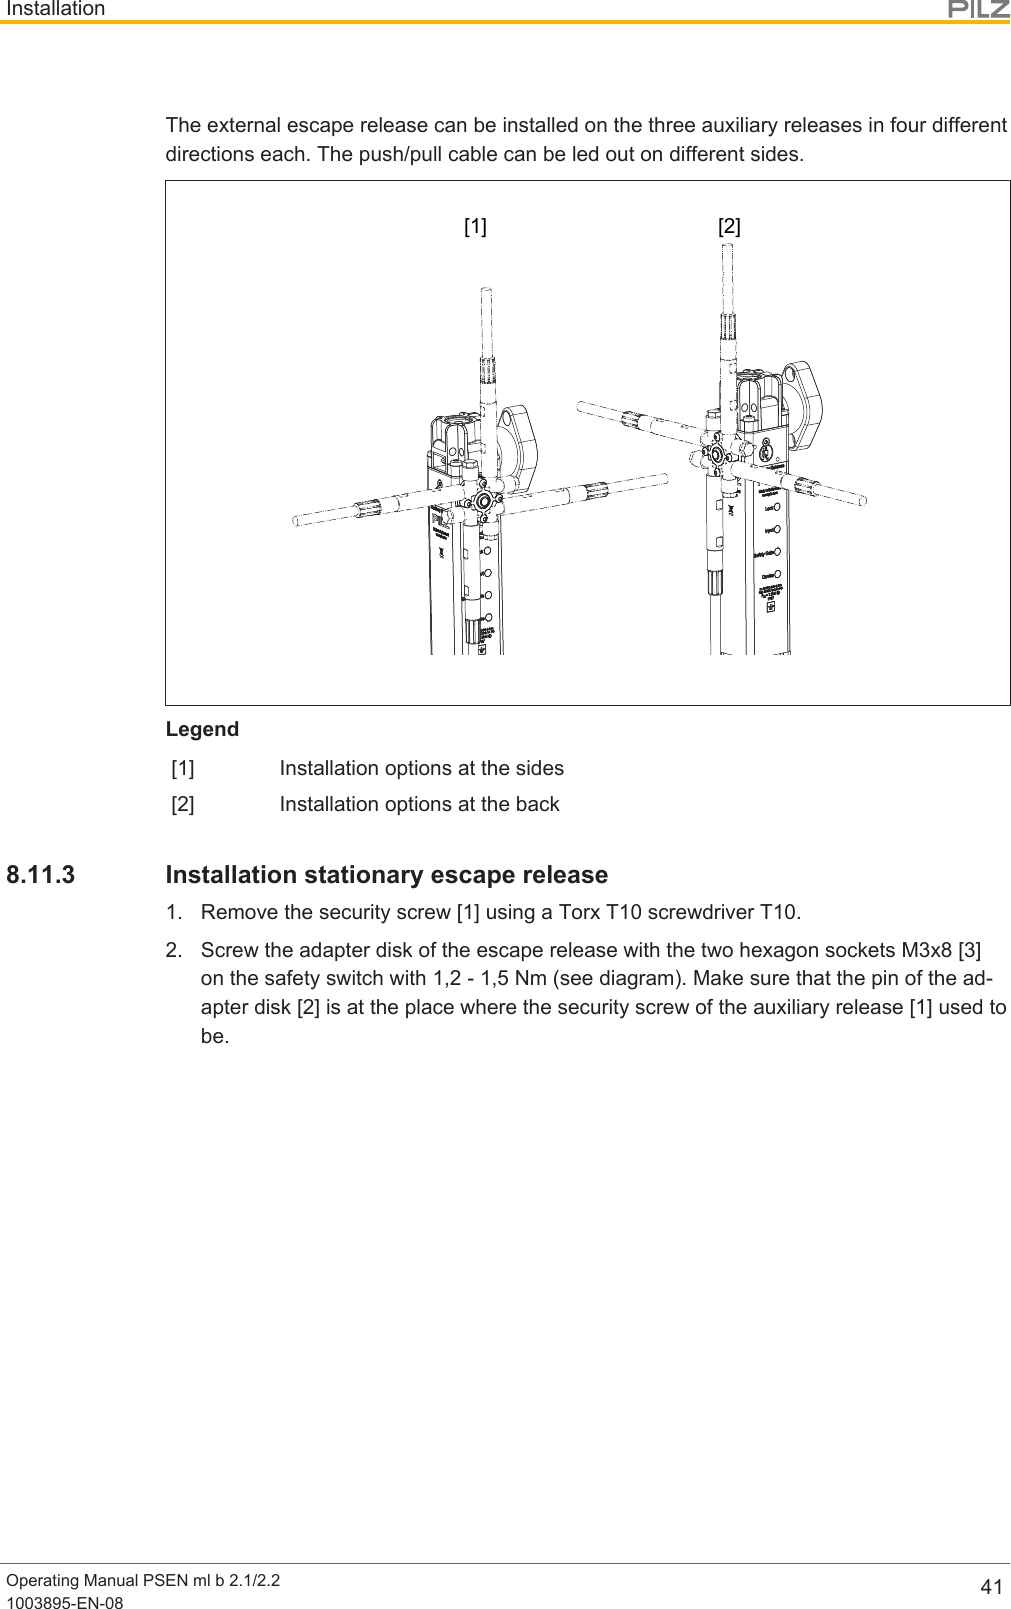 InstallationOperating Manual PSEN ml b 2.1/2.21003895-EN-08 41The external escape release can be installed on the three auxiliary releases in four differentdirections each. The push/pull cable can be led out on different sides.[1] [2]Legend[1] Installation options at the sides[2] Installation options at the back8.11.3 Installation stationary escape release1. Remove the security screw [1] using a Torx T10 screwdriver T10.2. Screw the adapter disk of the escape release with the two hexagon sockets M3x8[3]on the safety switch with 1,2 - 1,5 Nm (see diagram). Make sure that the pin of the ad-apter disk [2] is at the place where the security screw of the auxiliary release [1] used tobe.